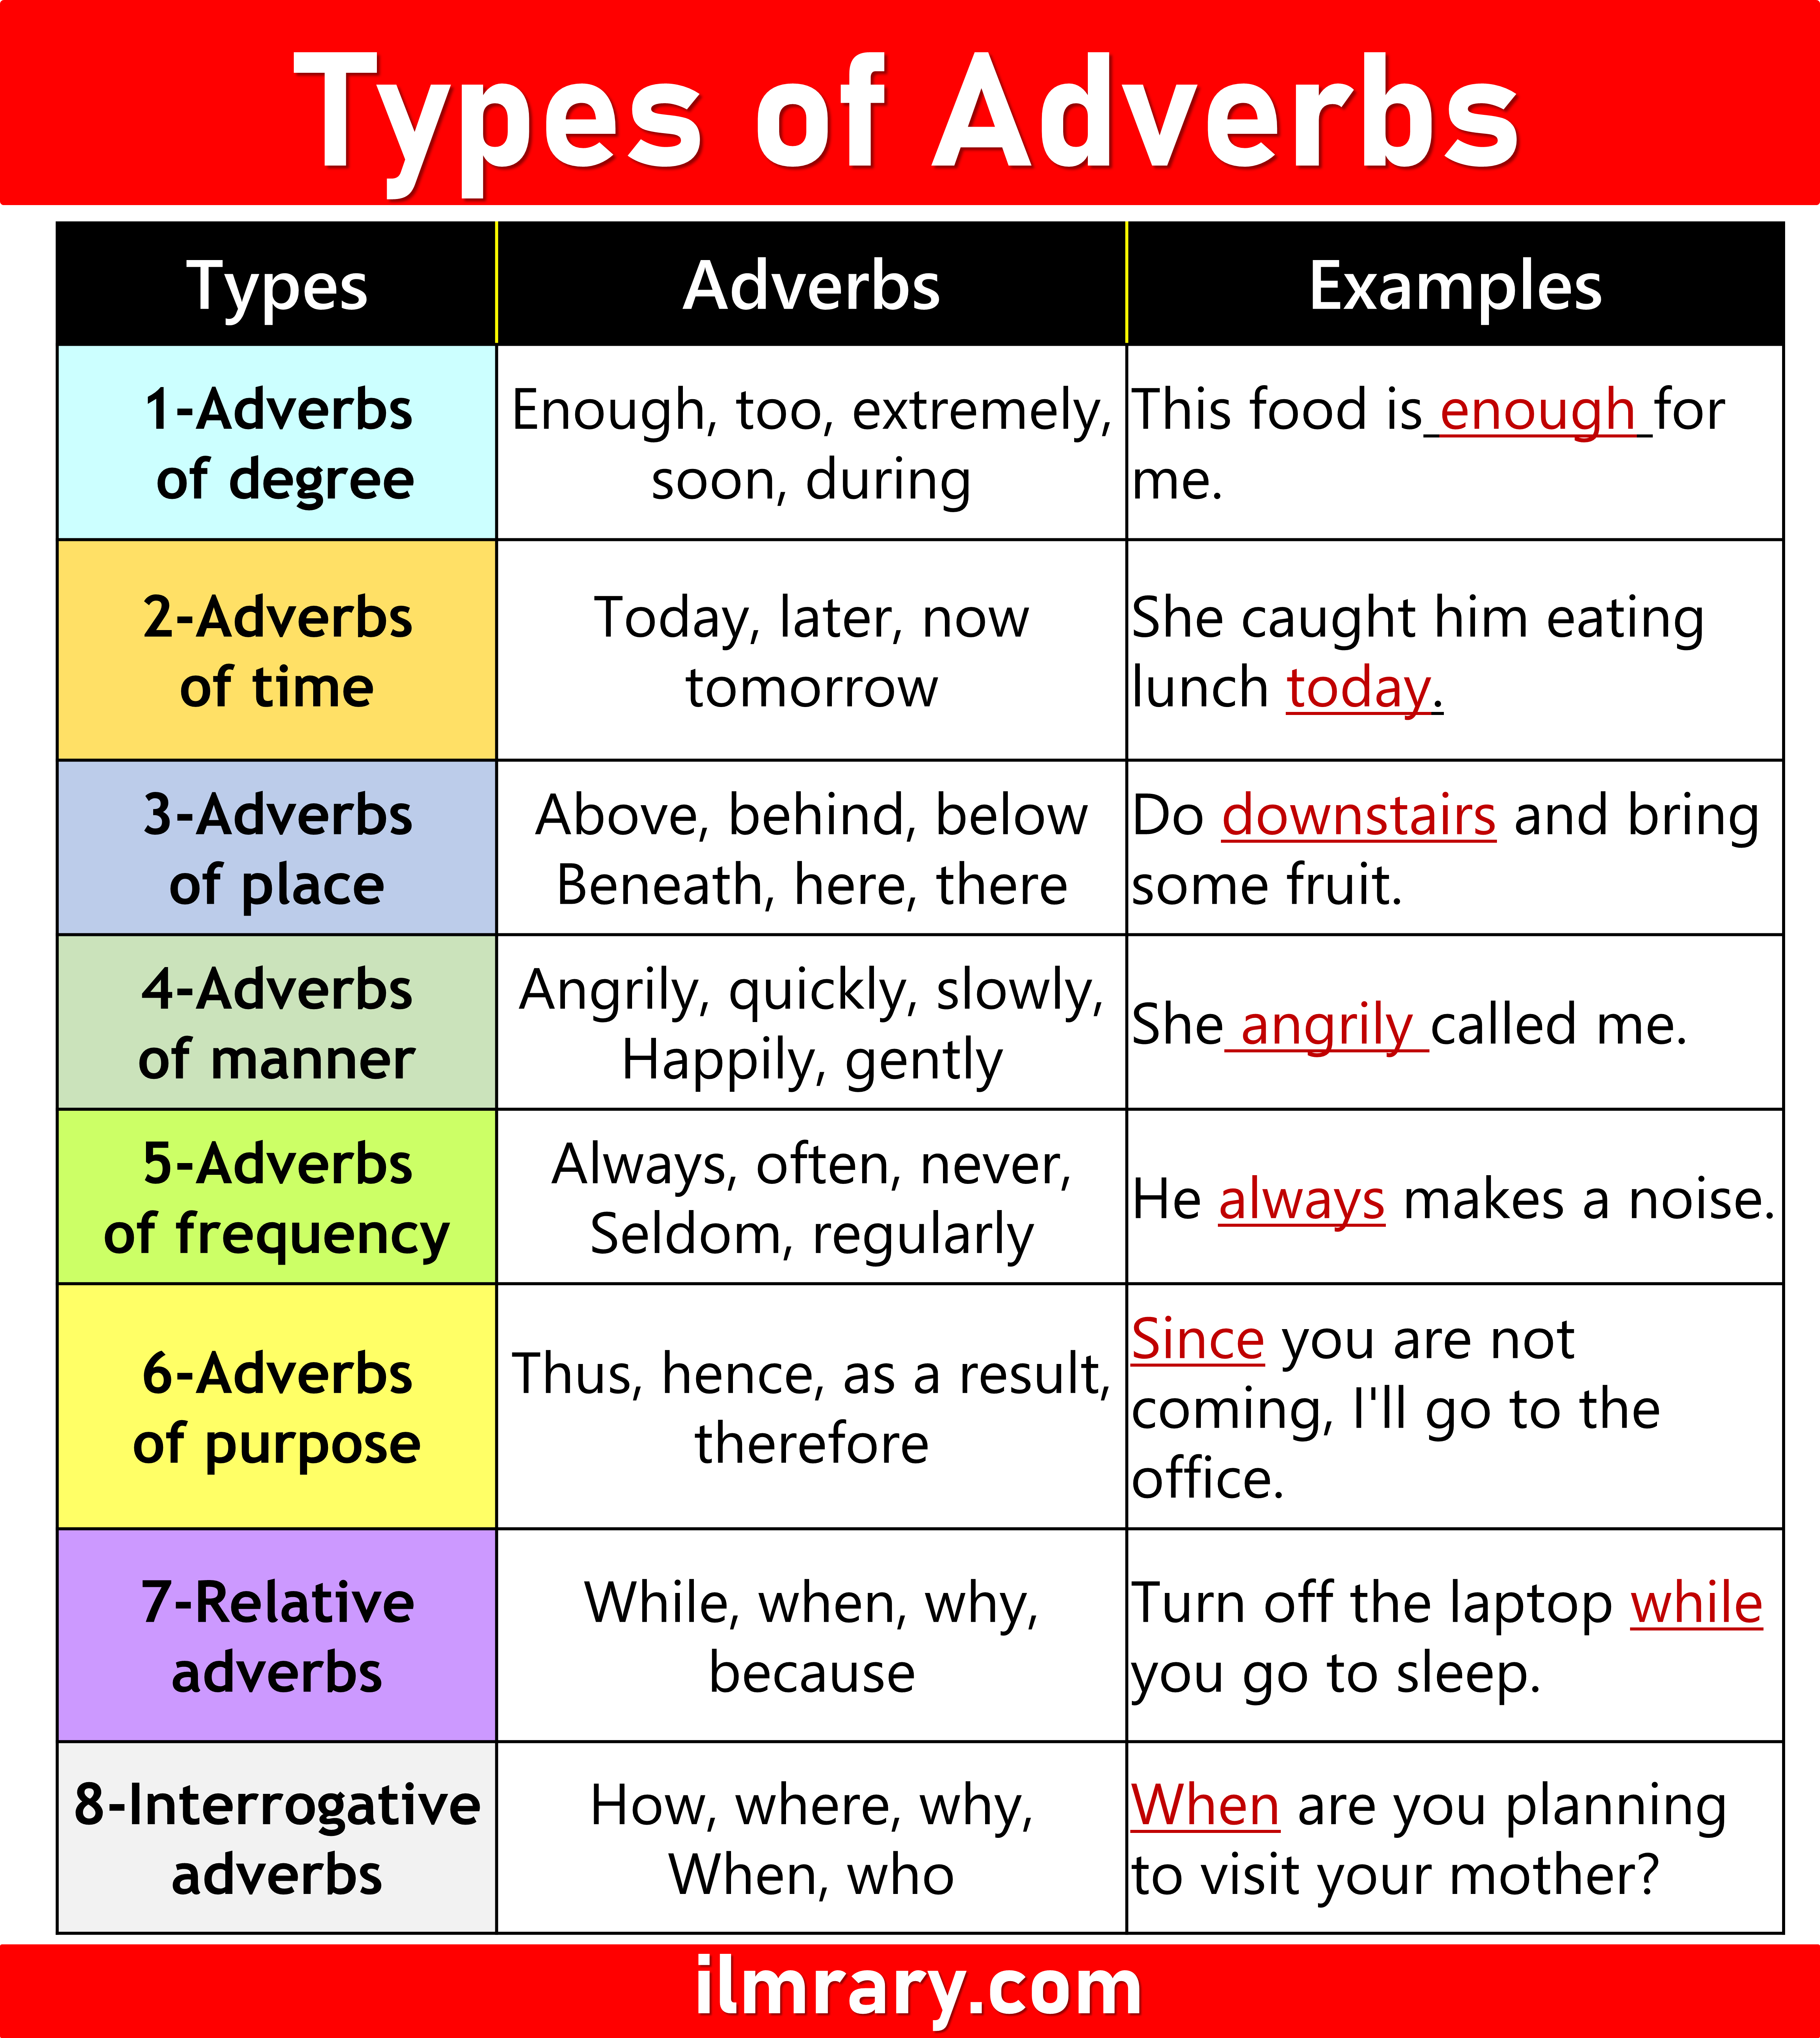 10 Types of Adverbs in English with Examples | Learn English